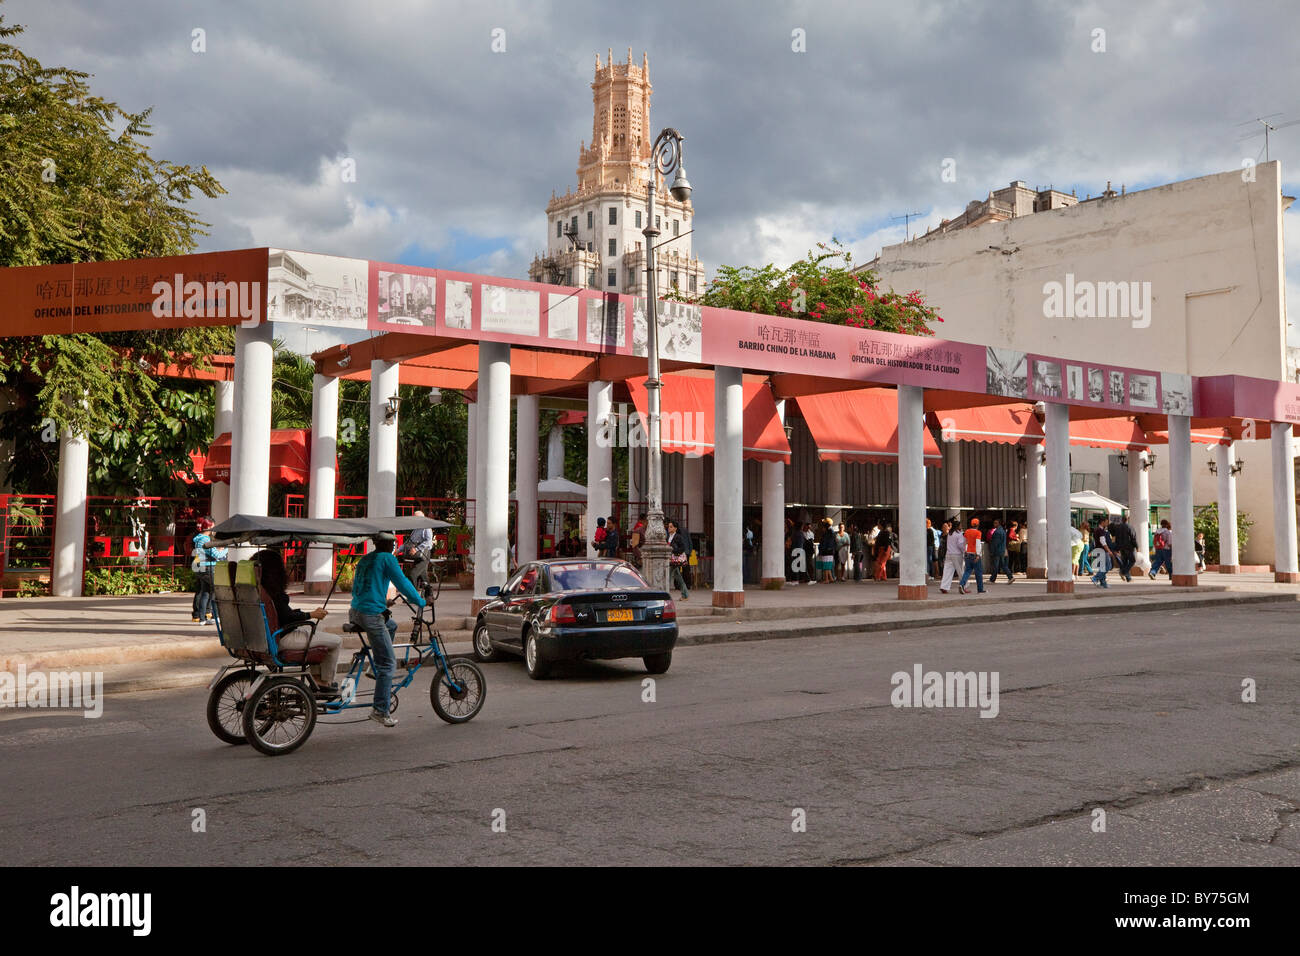 Cuba, Havana. Entrance to Shopping Arcade in Havana's Chinatown District. Cuban Telecom Building in Center Background. Stock Photo